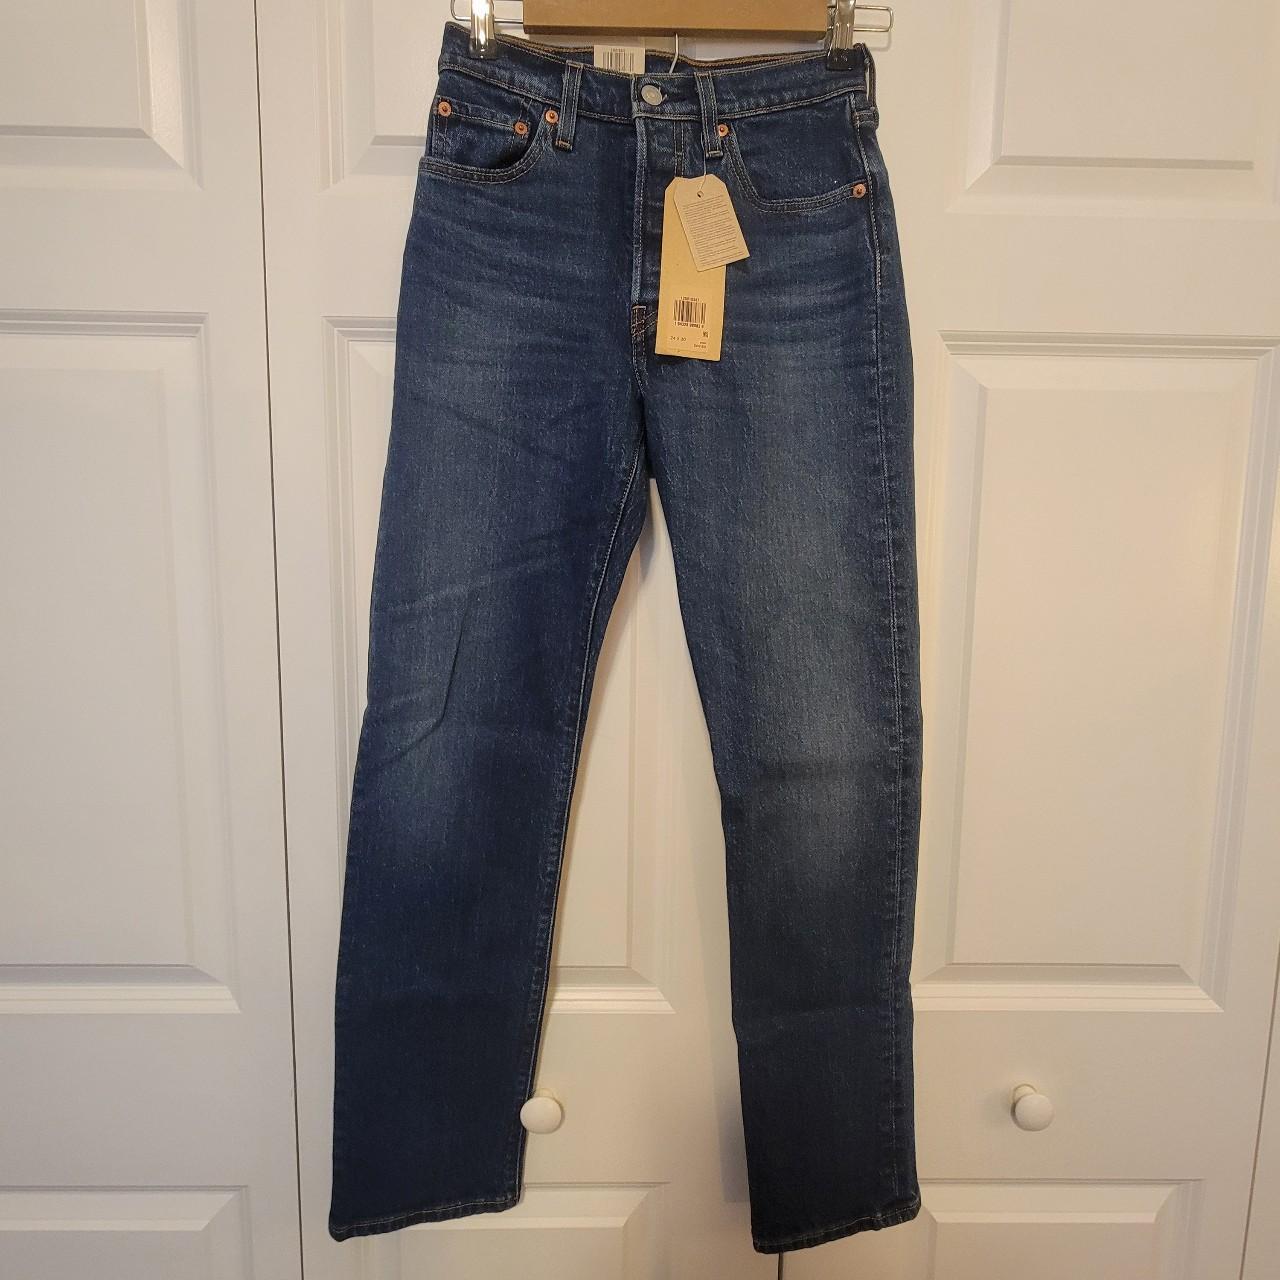 501 Levis jeans NWT high rise, button fly, straight... - Depop